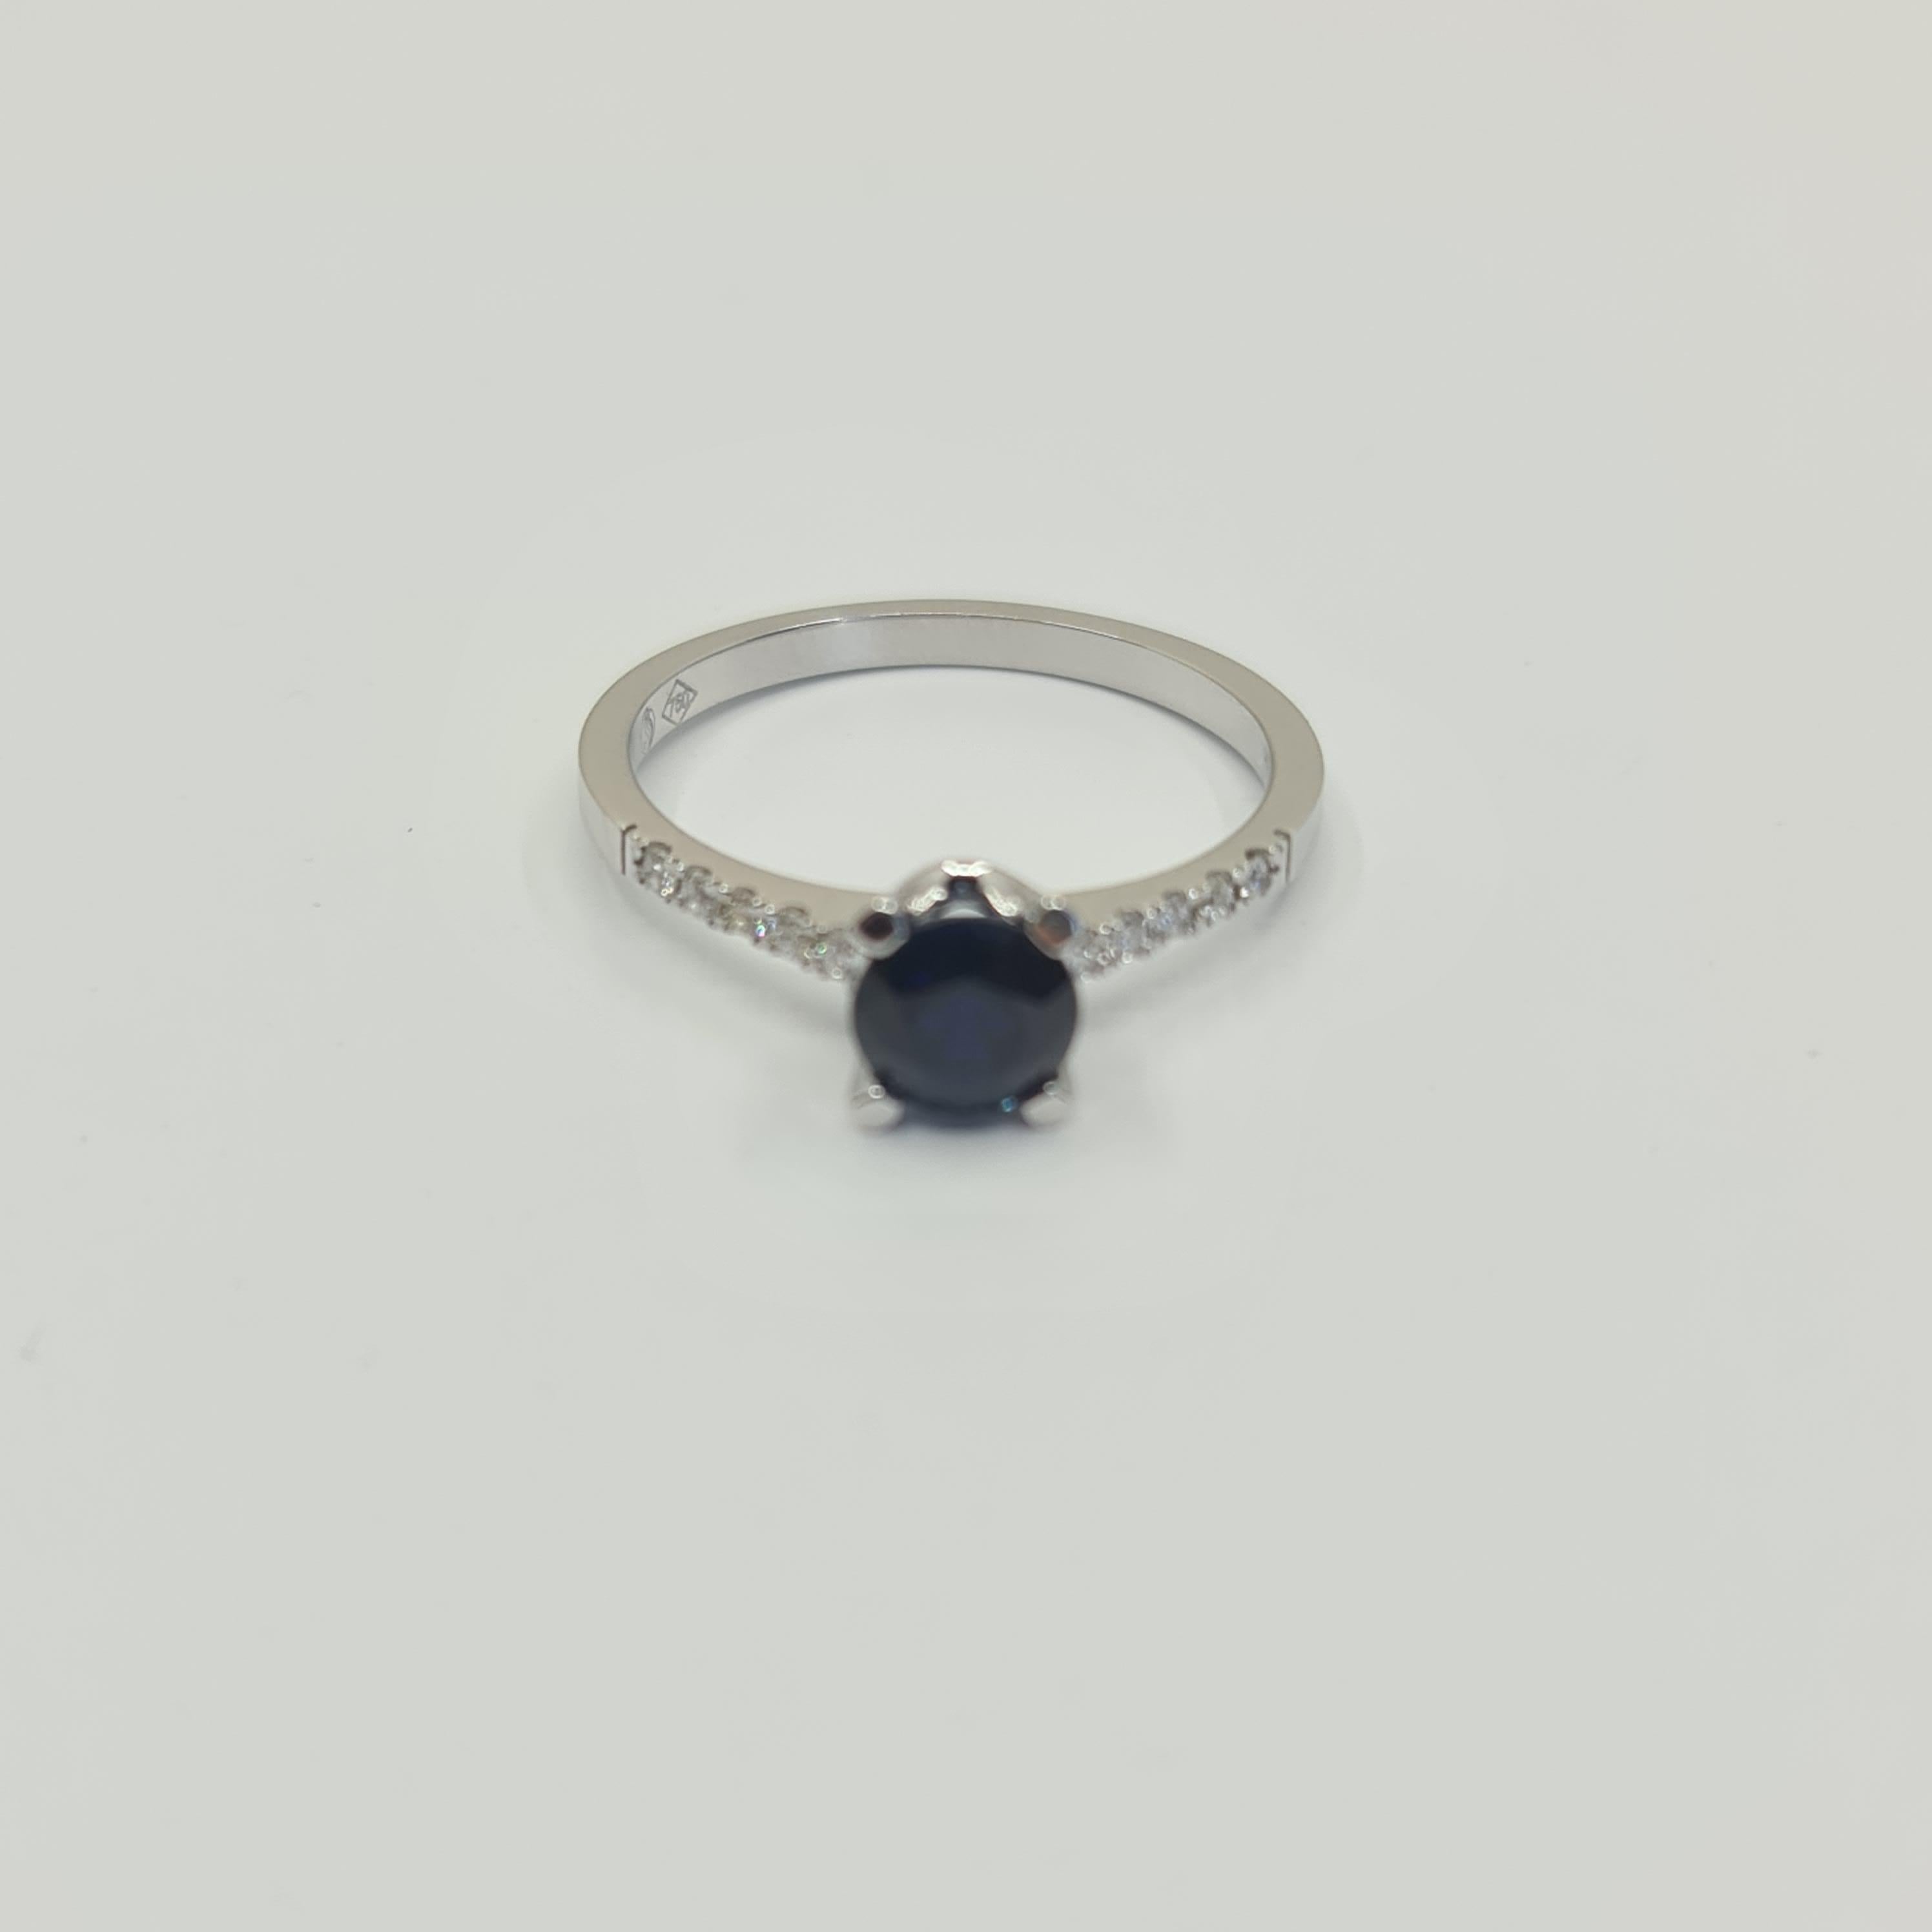 GIA Certified 1.03 Carat Natural Sapphire and Diamonds Ring

- Royal Blue Sapphire. 
- Not Heated, All Natural. 
- GIA 6224469749
- Diamond Sides.
- High Gloss Finish. 

4 C`s Brillants:
Carat: 0.09ct
Color: F
Clarity: SI1
Cut: Very Good

Feel free